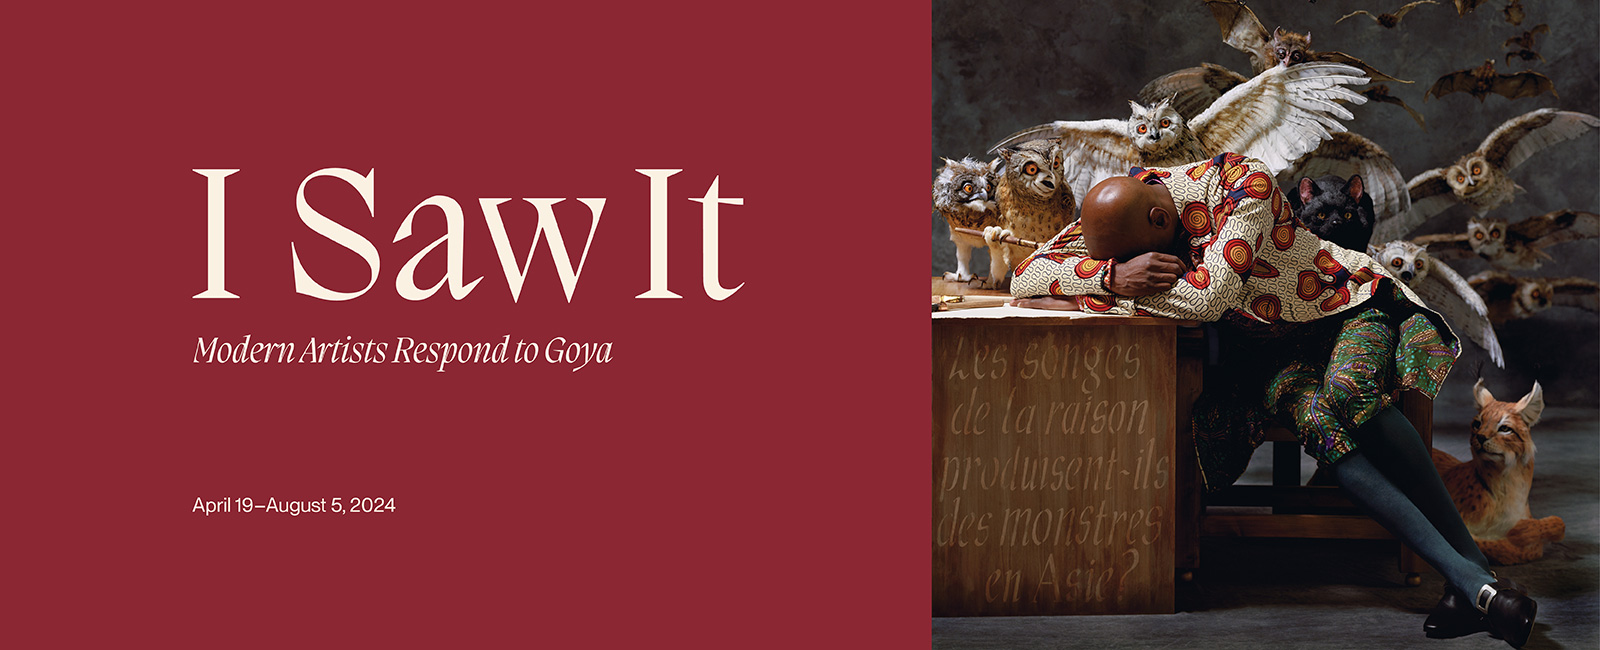 Graphic banner promoting the exhibition, "I Saw It: Modern Artists Respond to Goya"